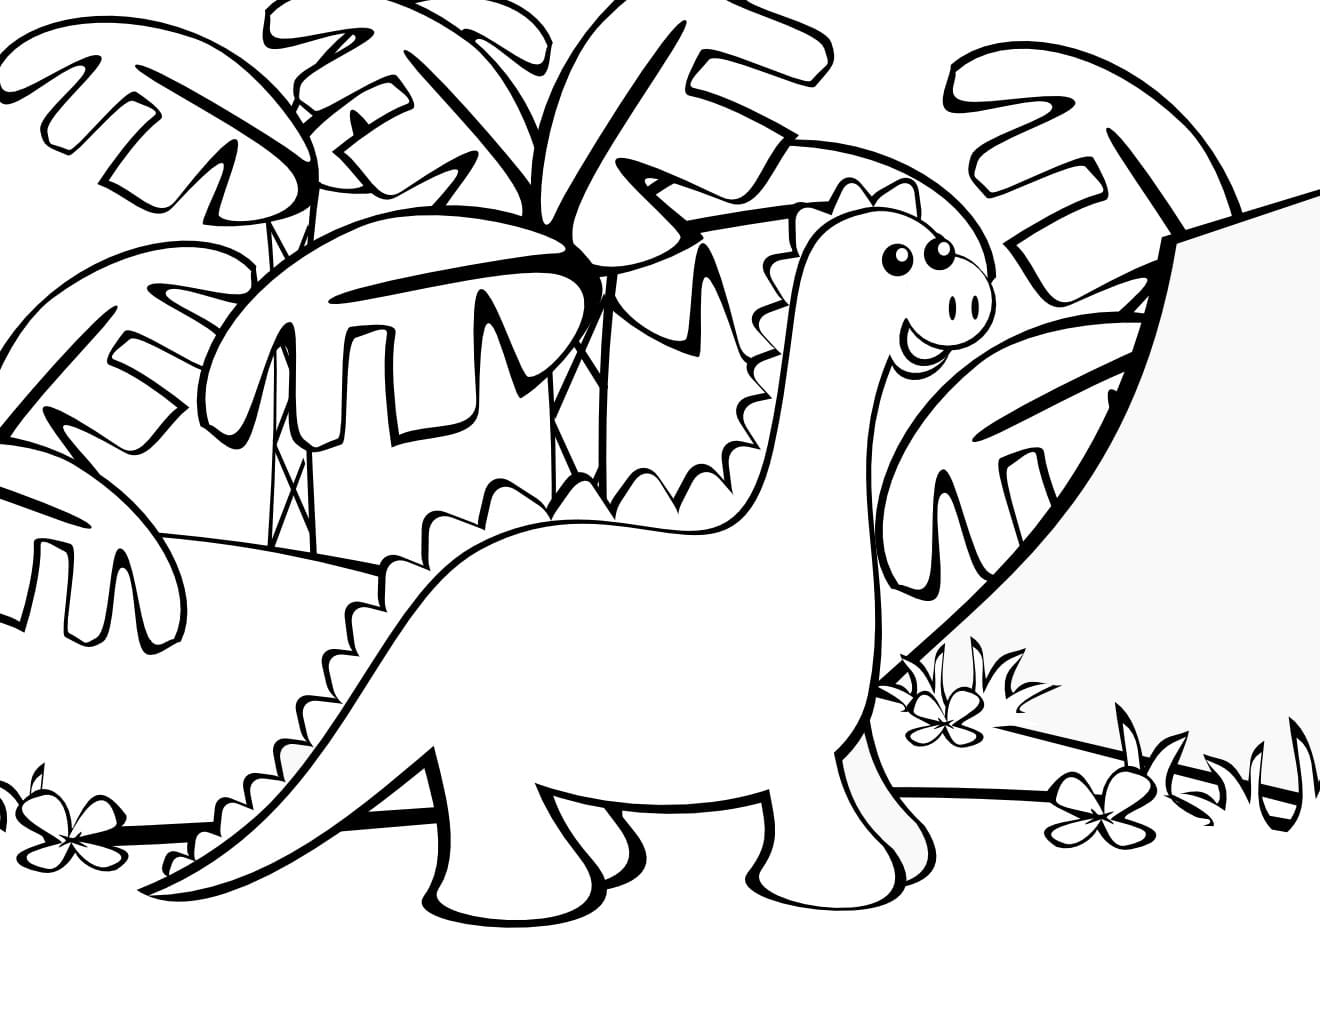 Coloring pages Dinosaurs Large collection Print for Free